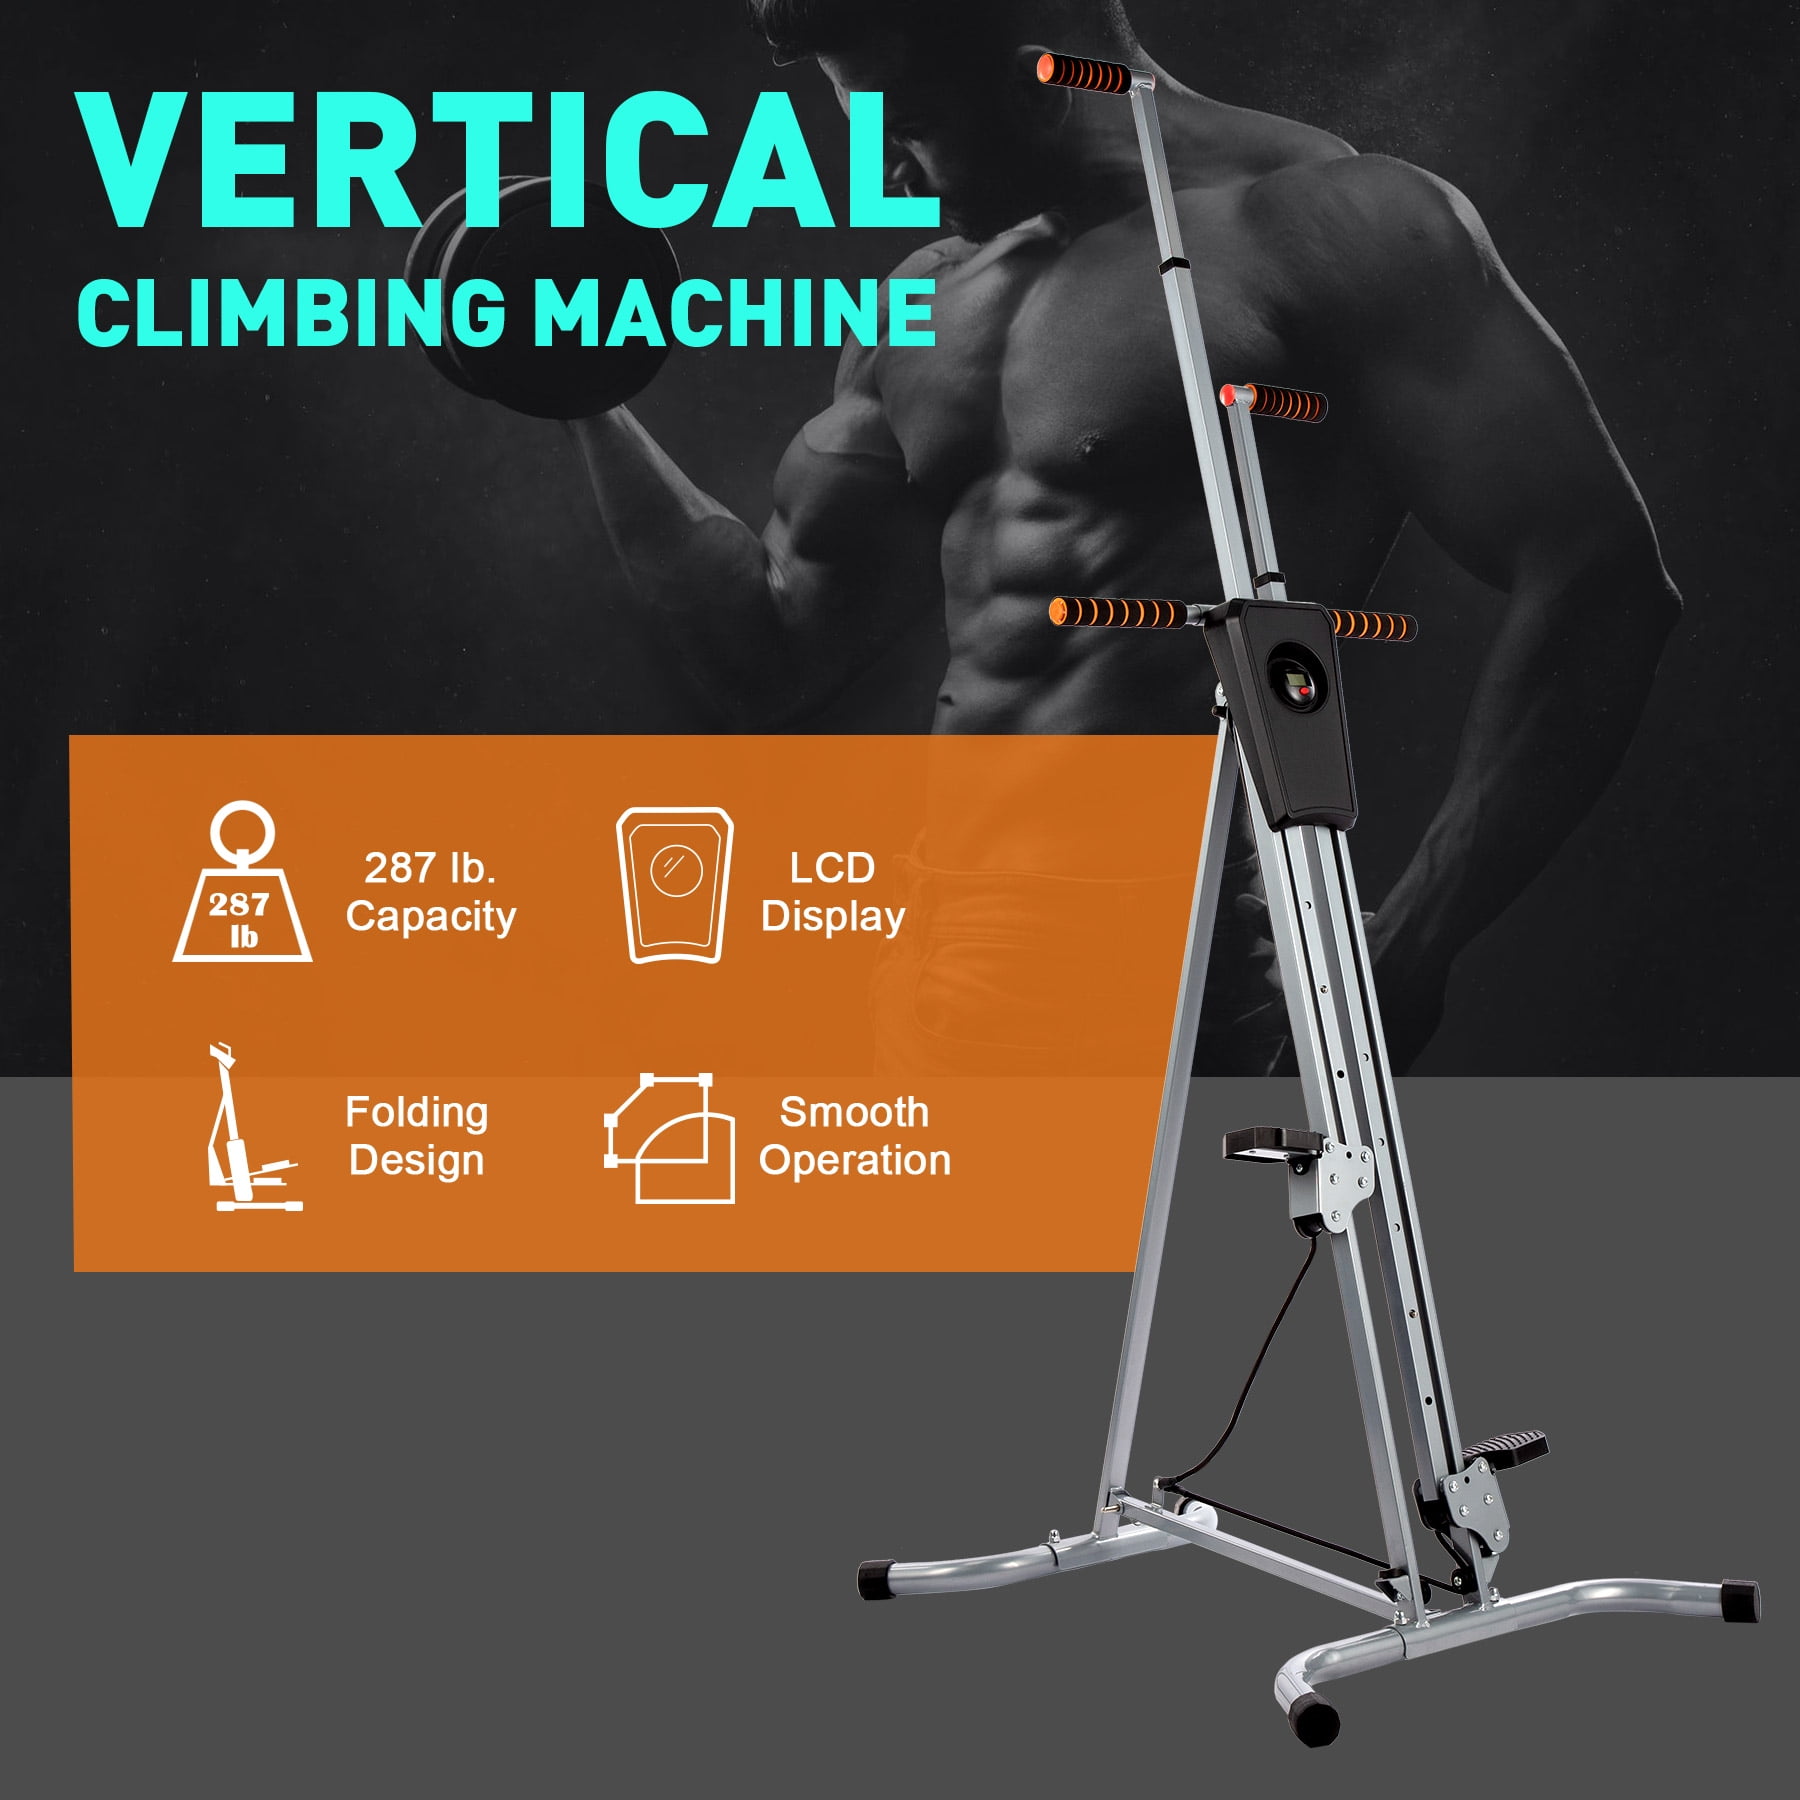 Details about   2 in 1 Vertical Climber Machine Exercise Equipment Stepper Cardio Fitness Gym US 